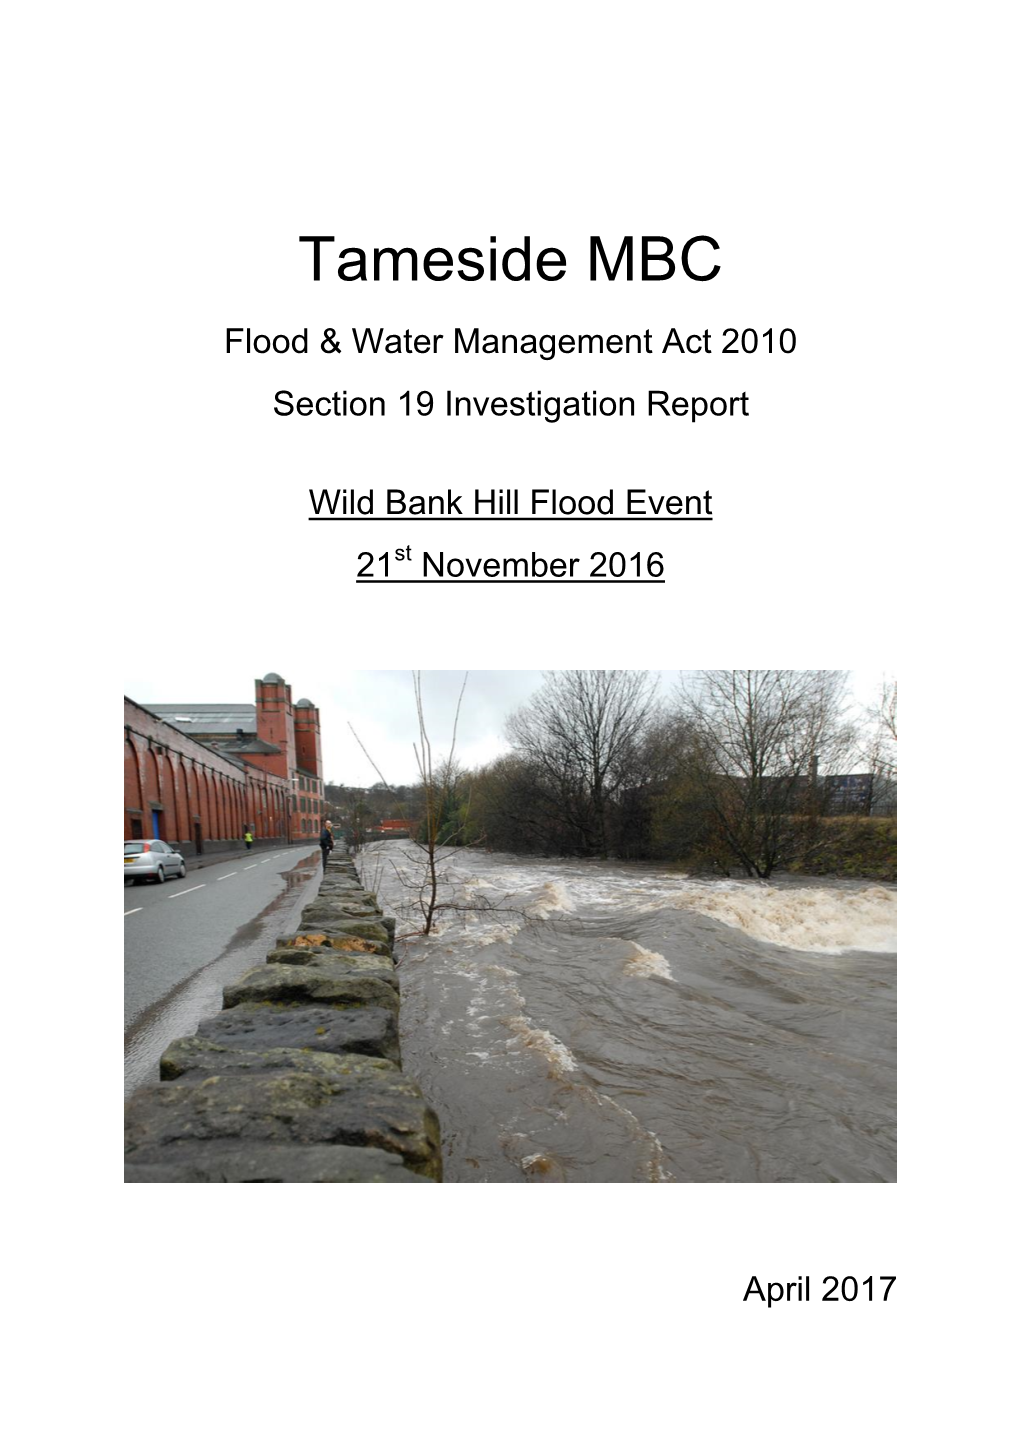 Section 19 Report; Wild Bank Hill Flood Event, 21St November 2016